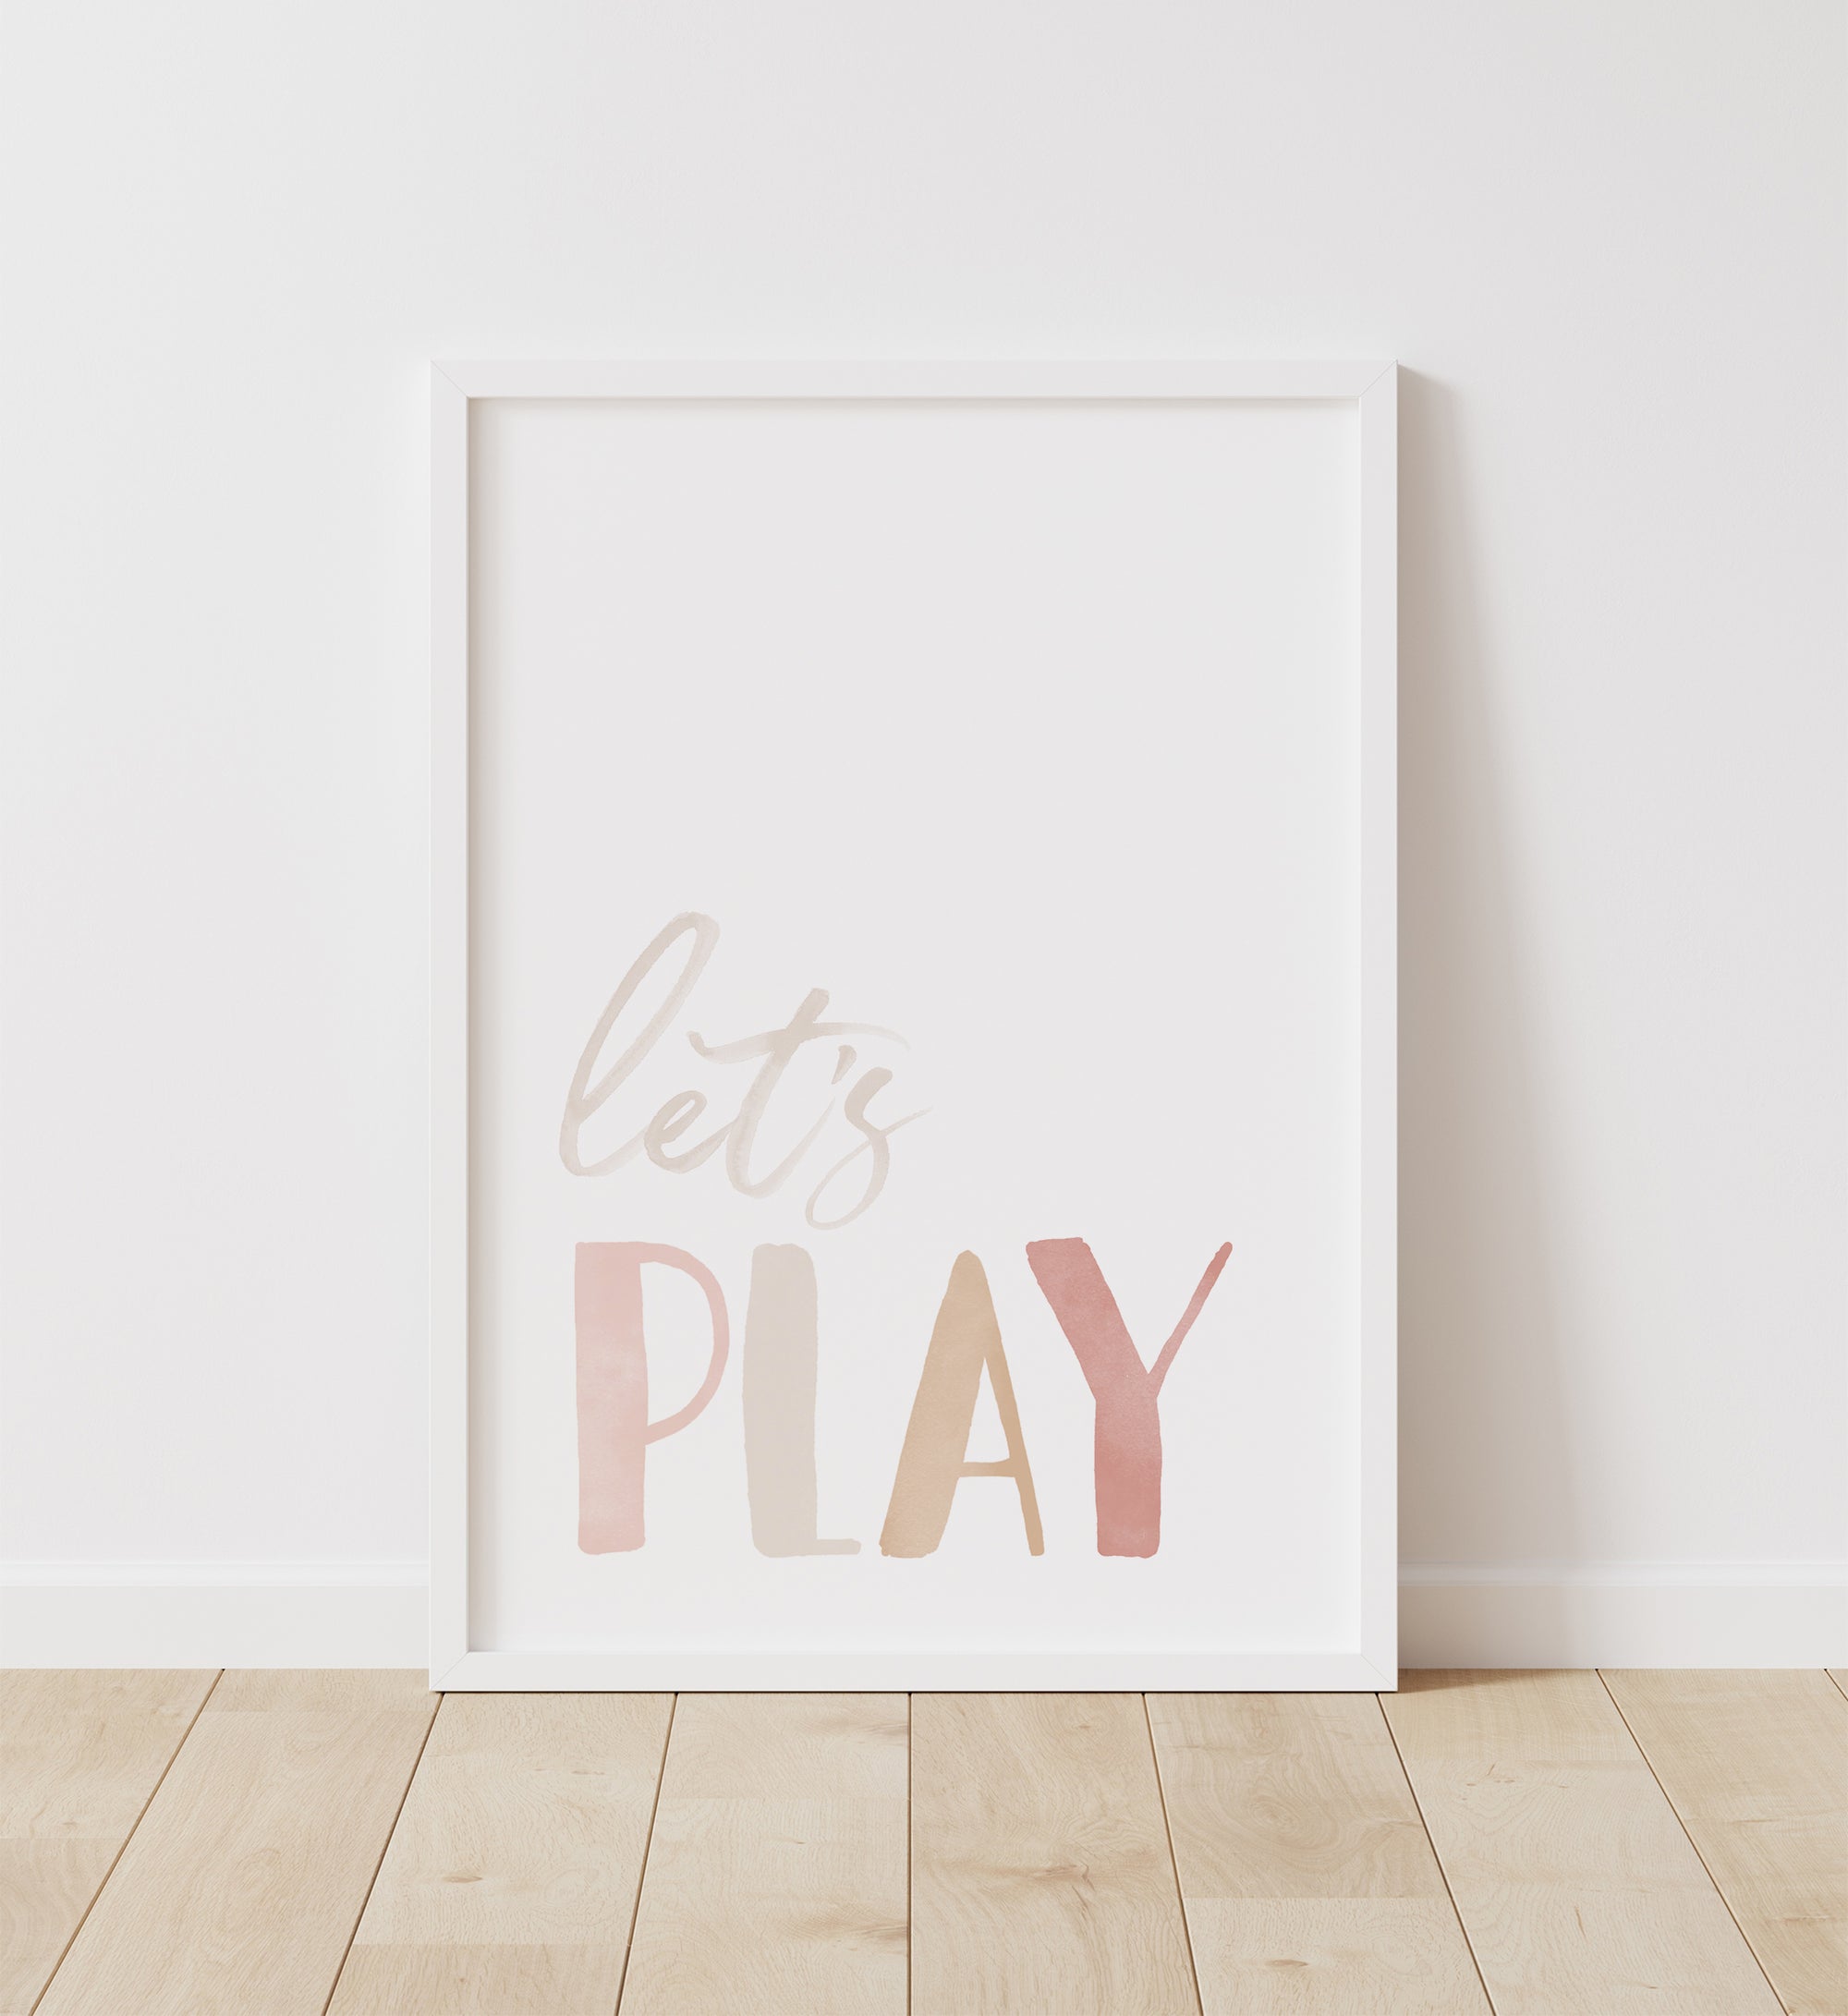 Let's Play Print - PNCP